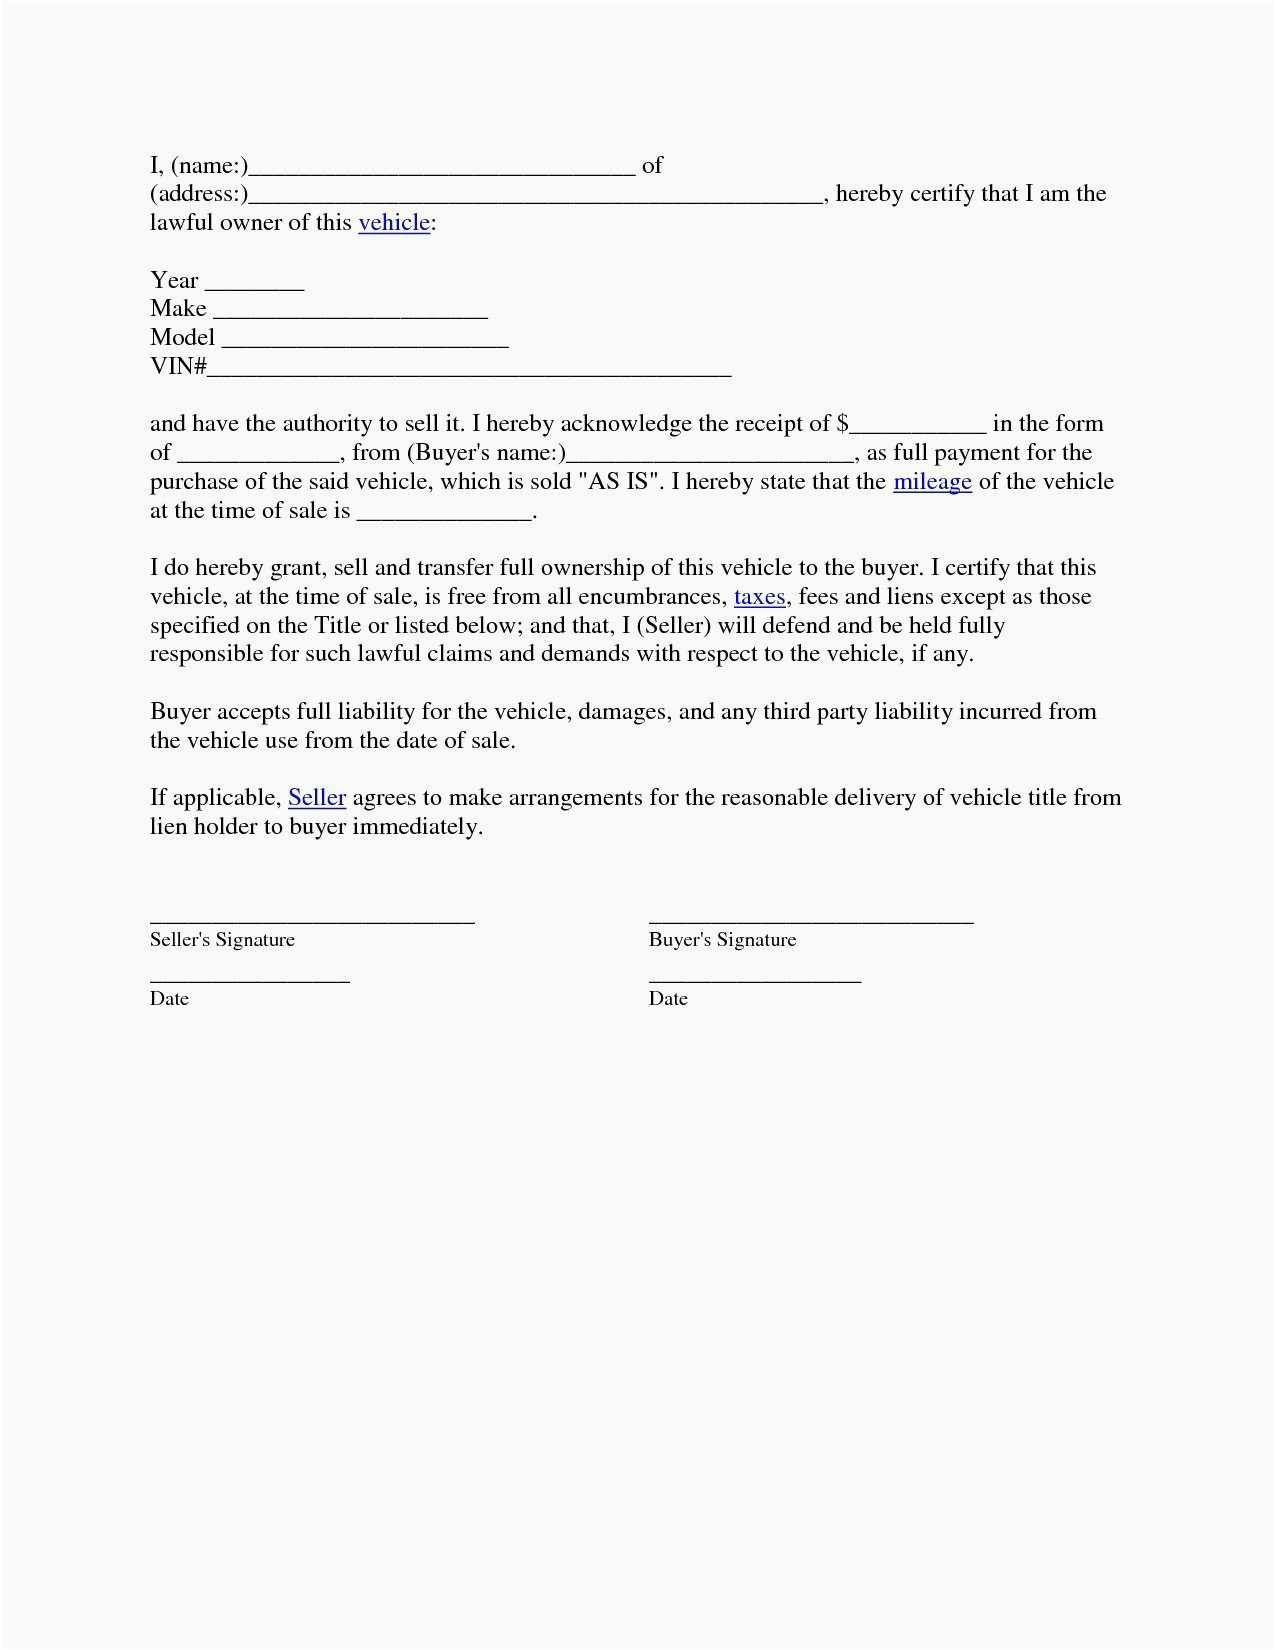 sweat-equity-agreement-template-free-download-44-investment-agreement